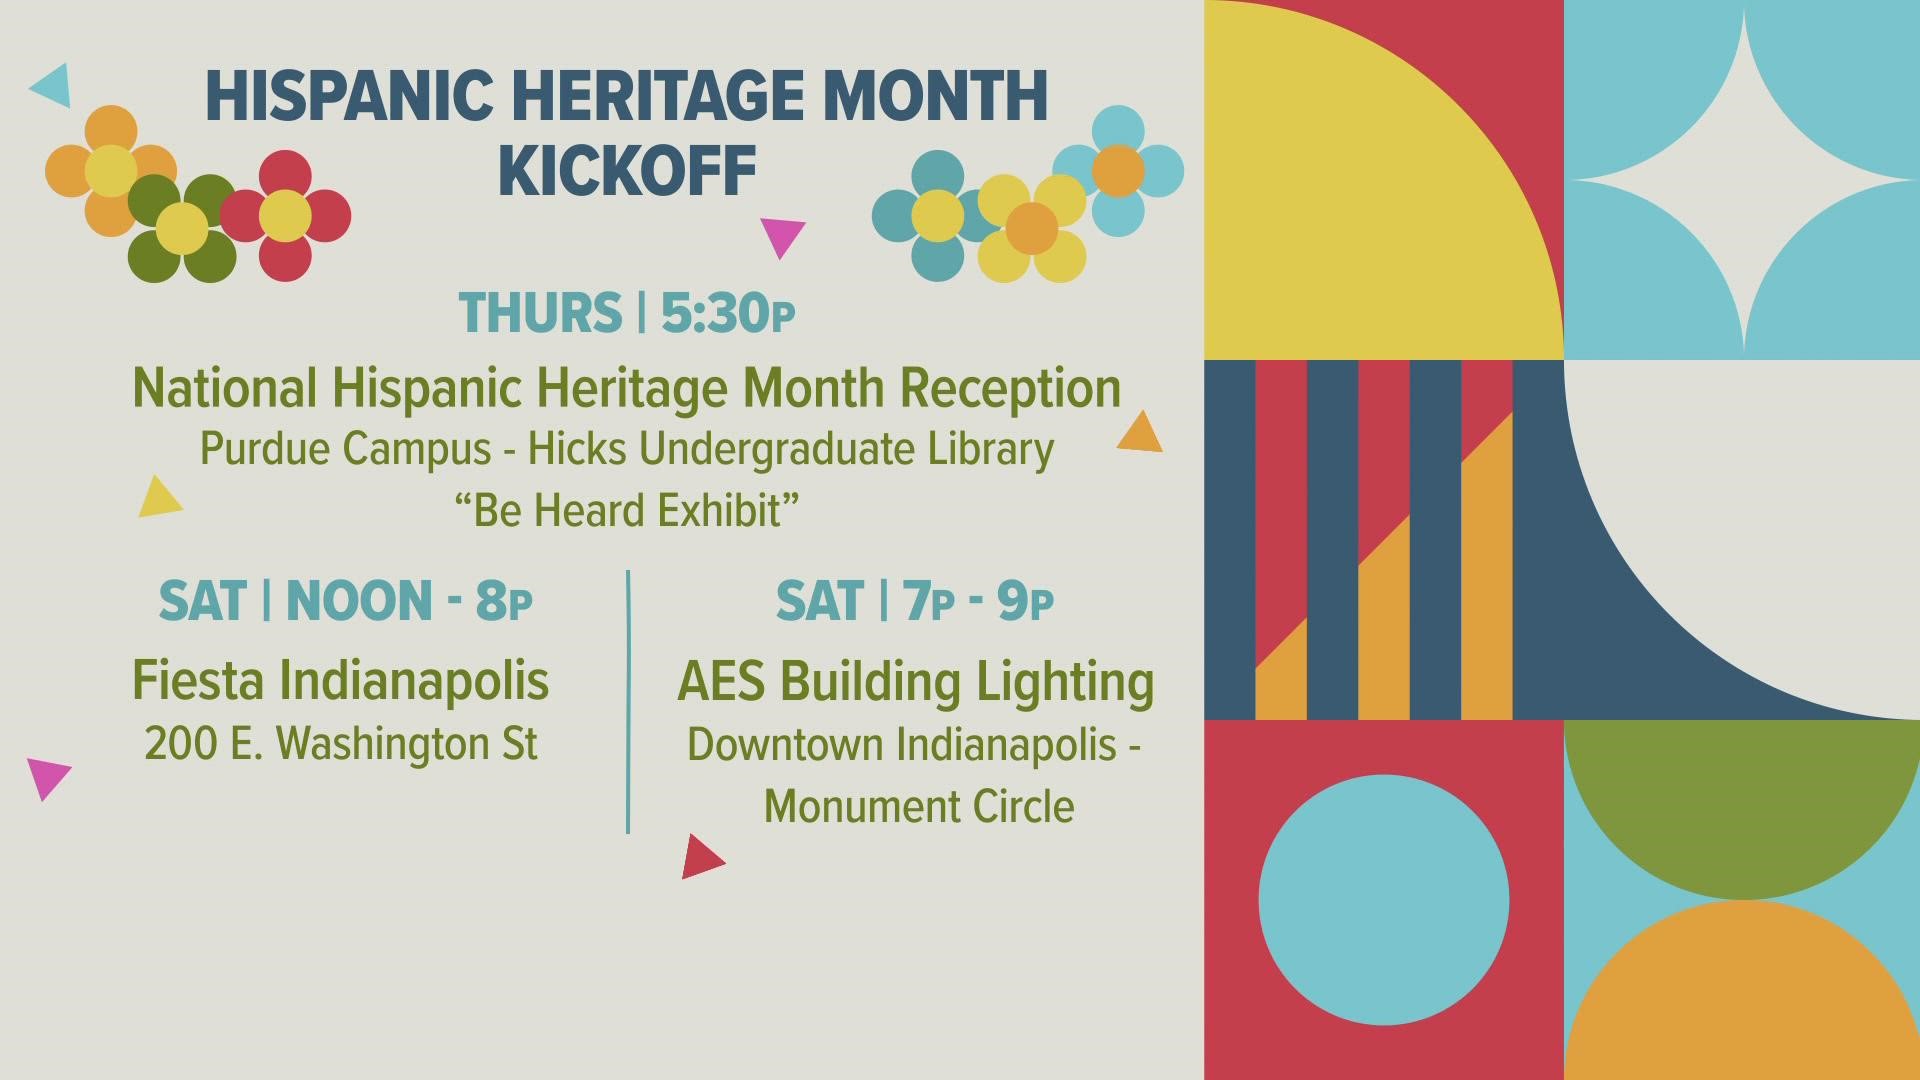 Today, Indianapolis joins the rest of the country in celebrating the first day of Hispanic Heritage Month.